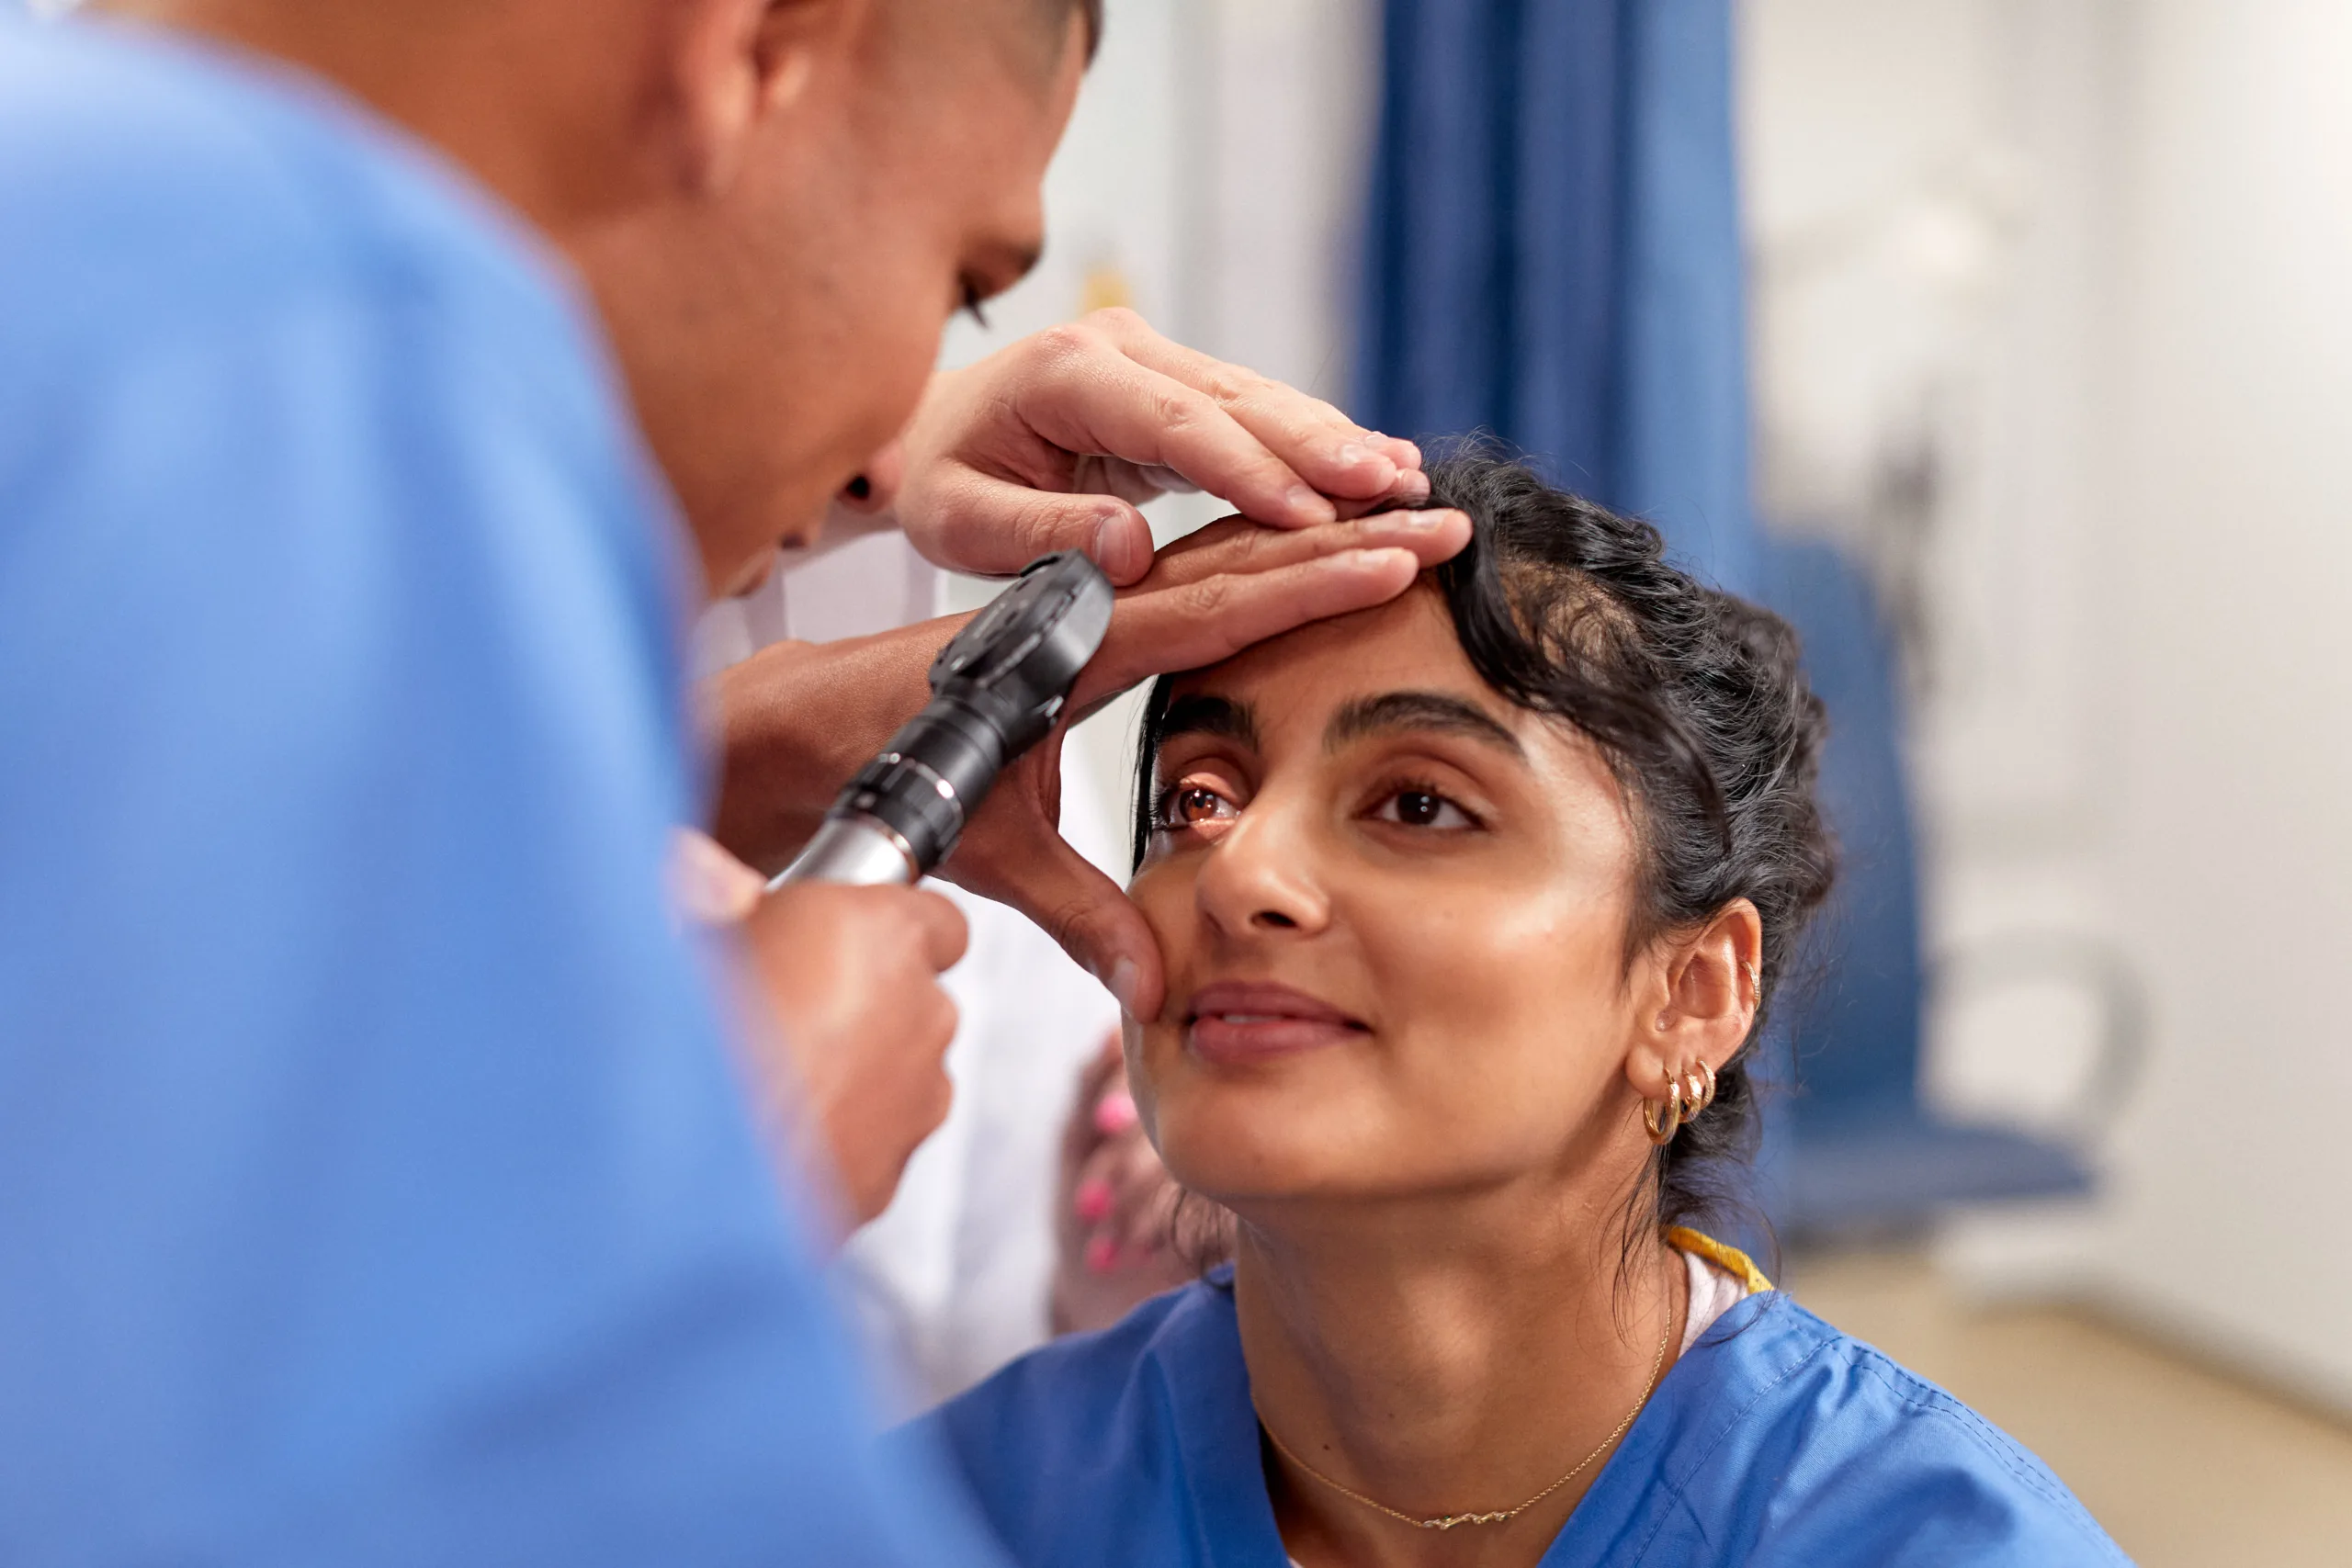 Celebrating Healthy Vision Month: empowering eye care providers